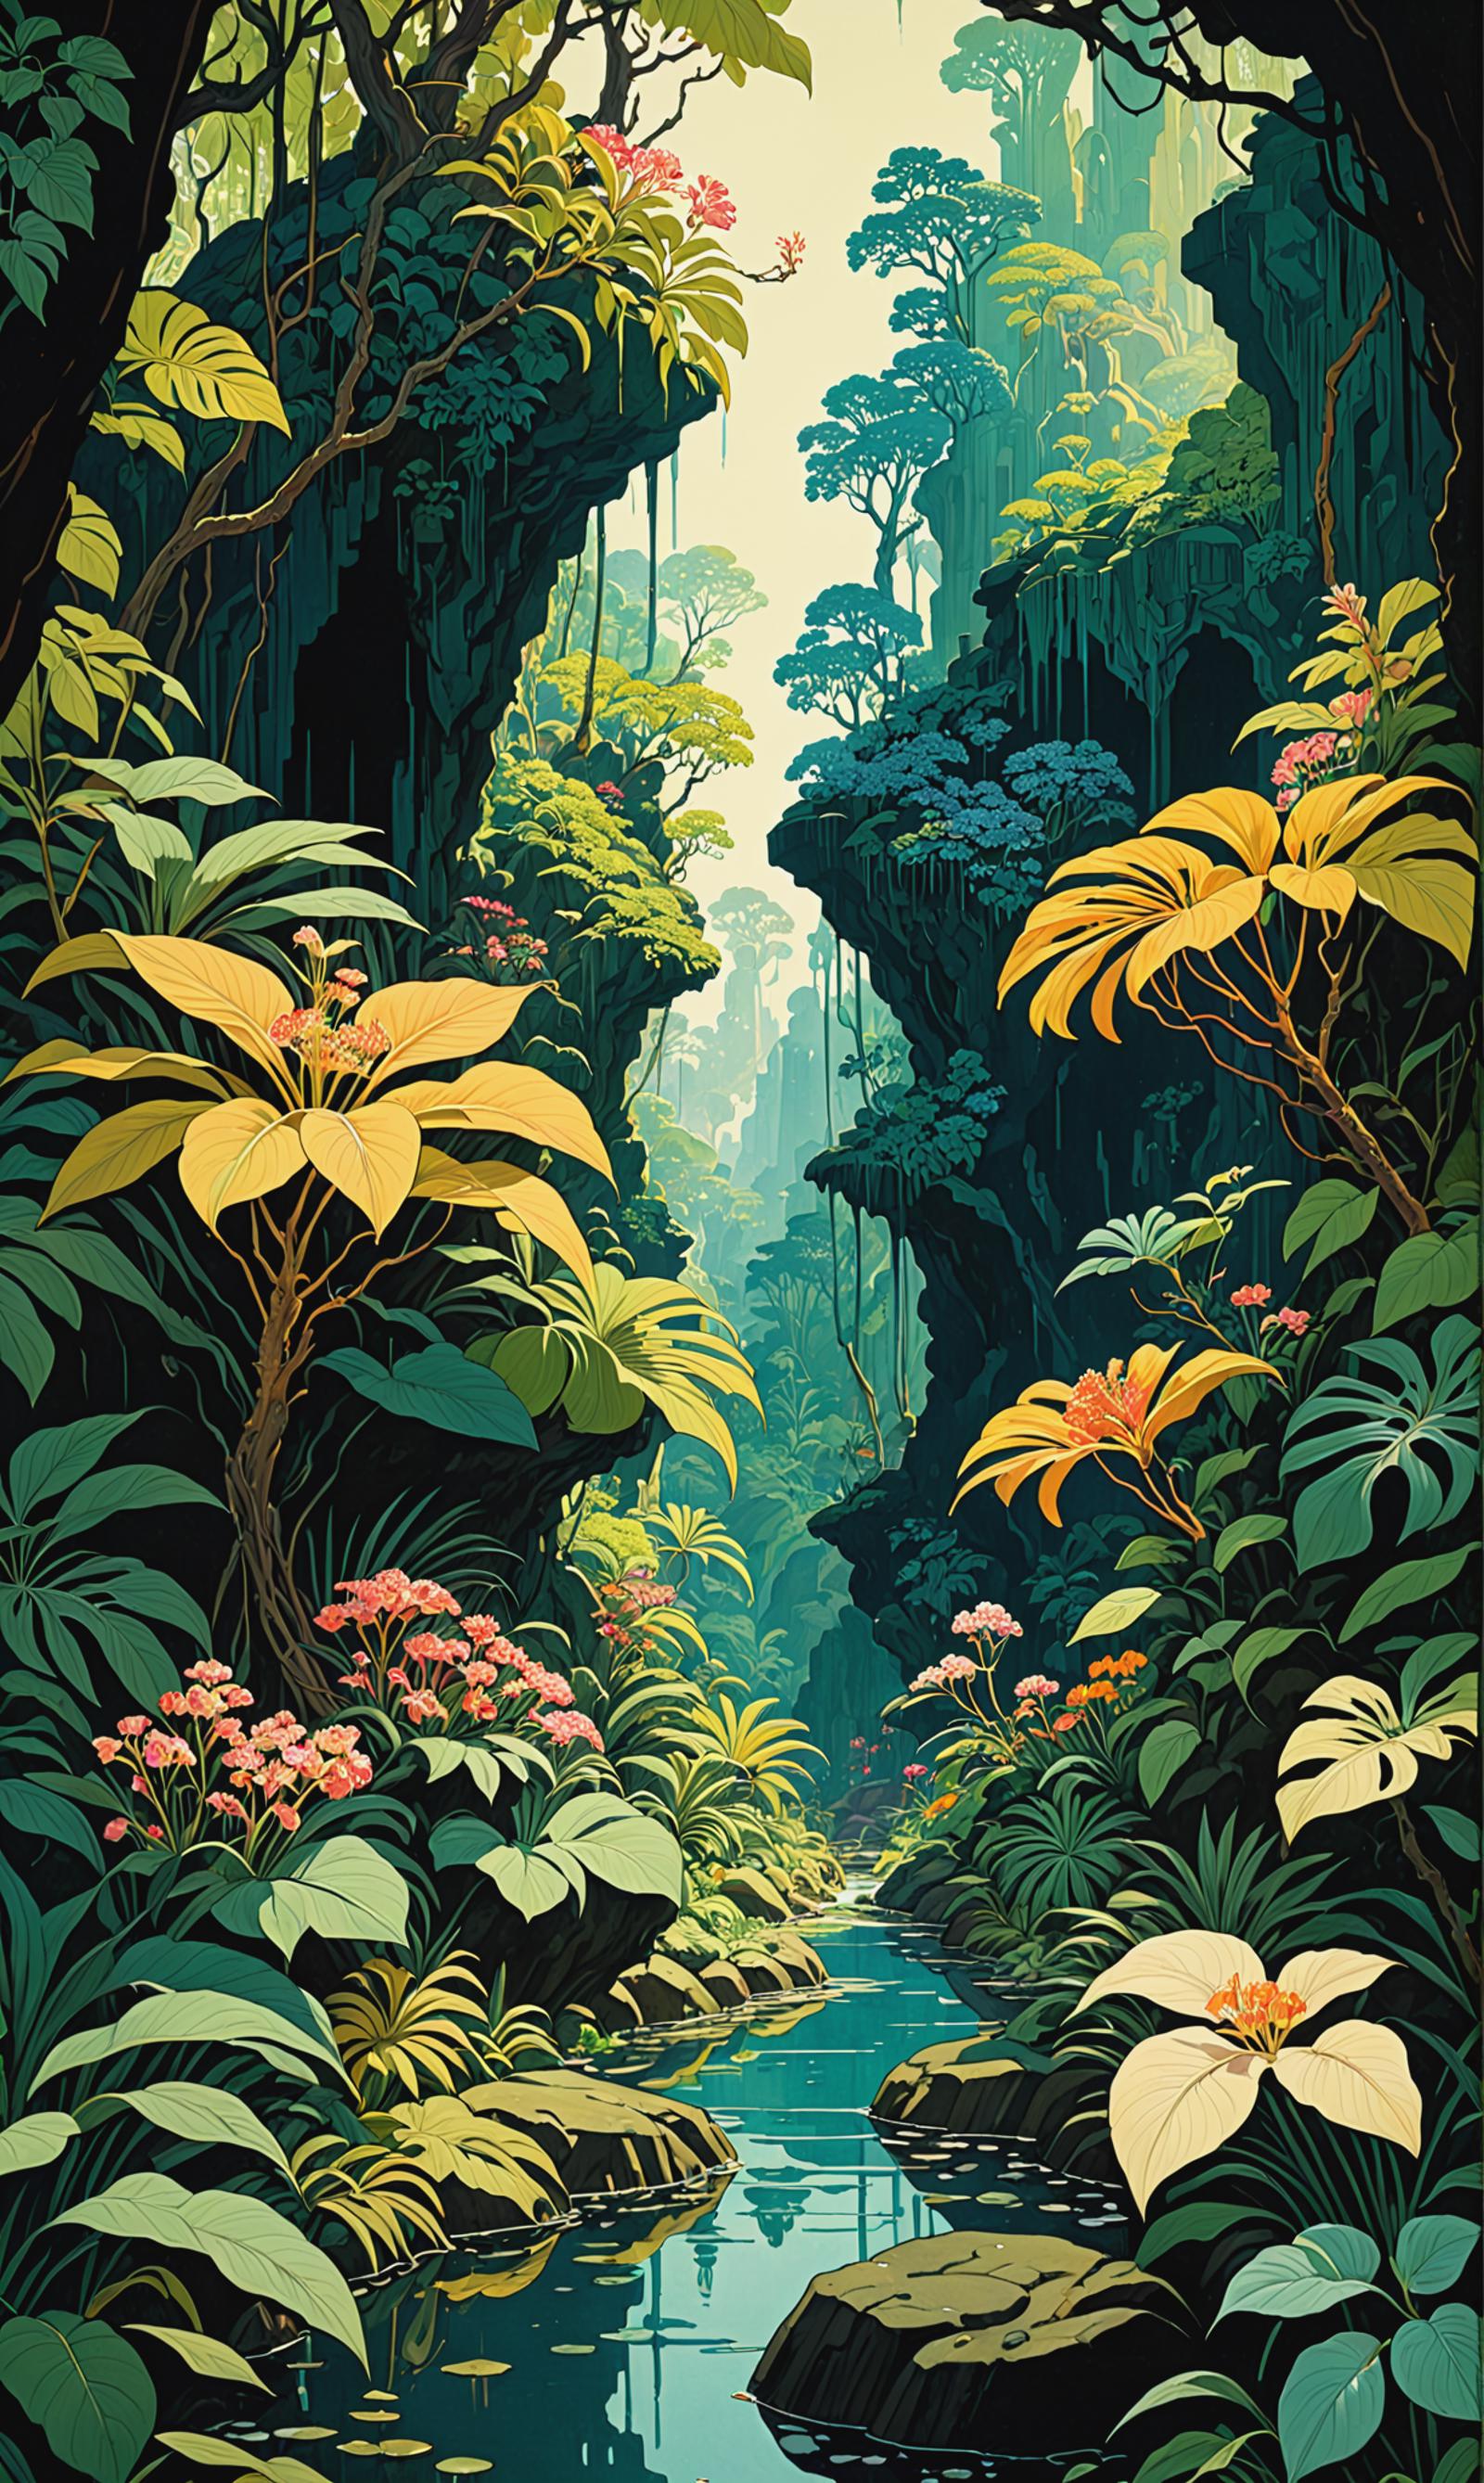 Vibrant Waterfall Scene in a Lush, Tropical Forest with Green and Yellow Plants